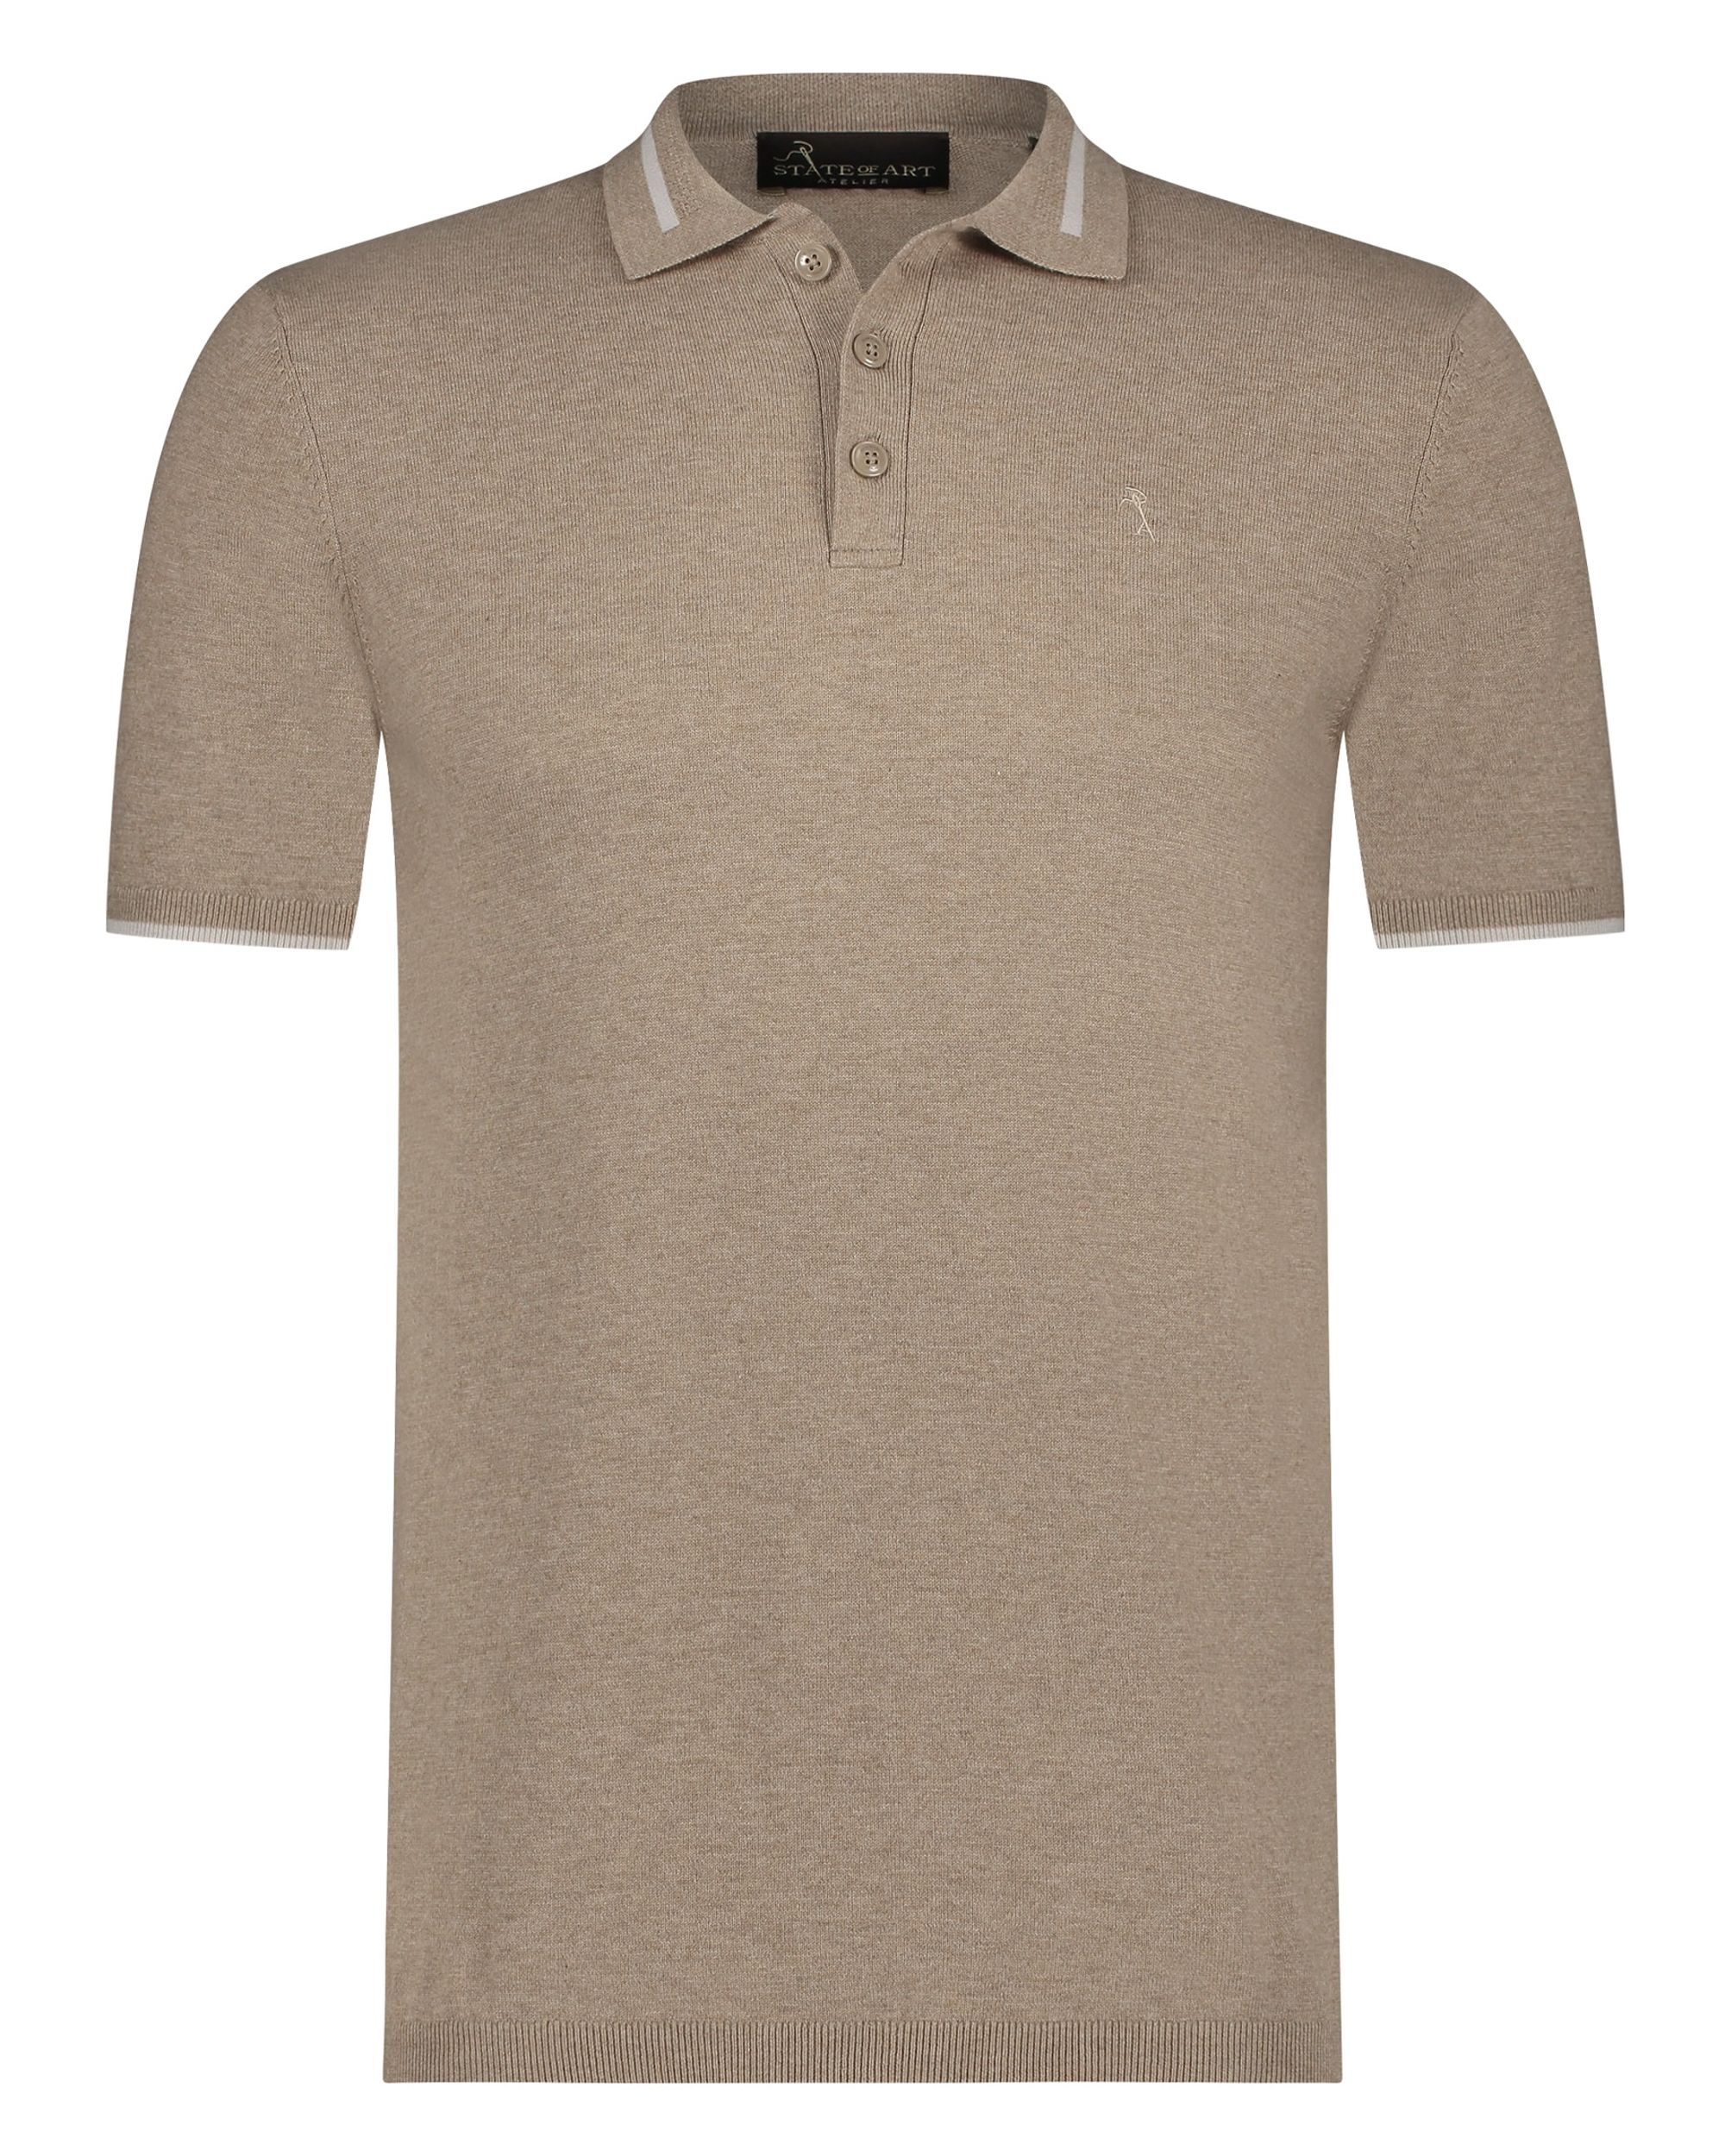 State of Art Polo KM Beige 095078-001-4XL